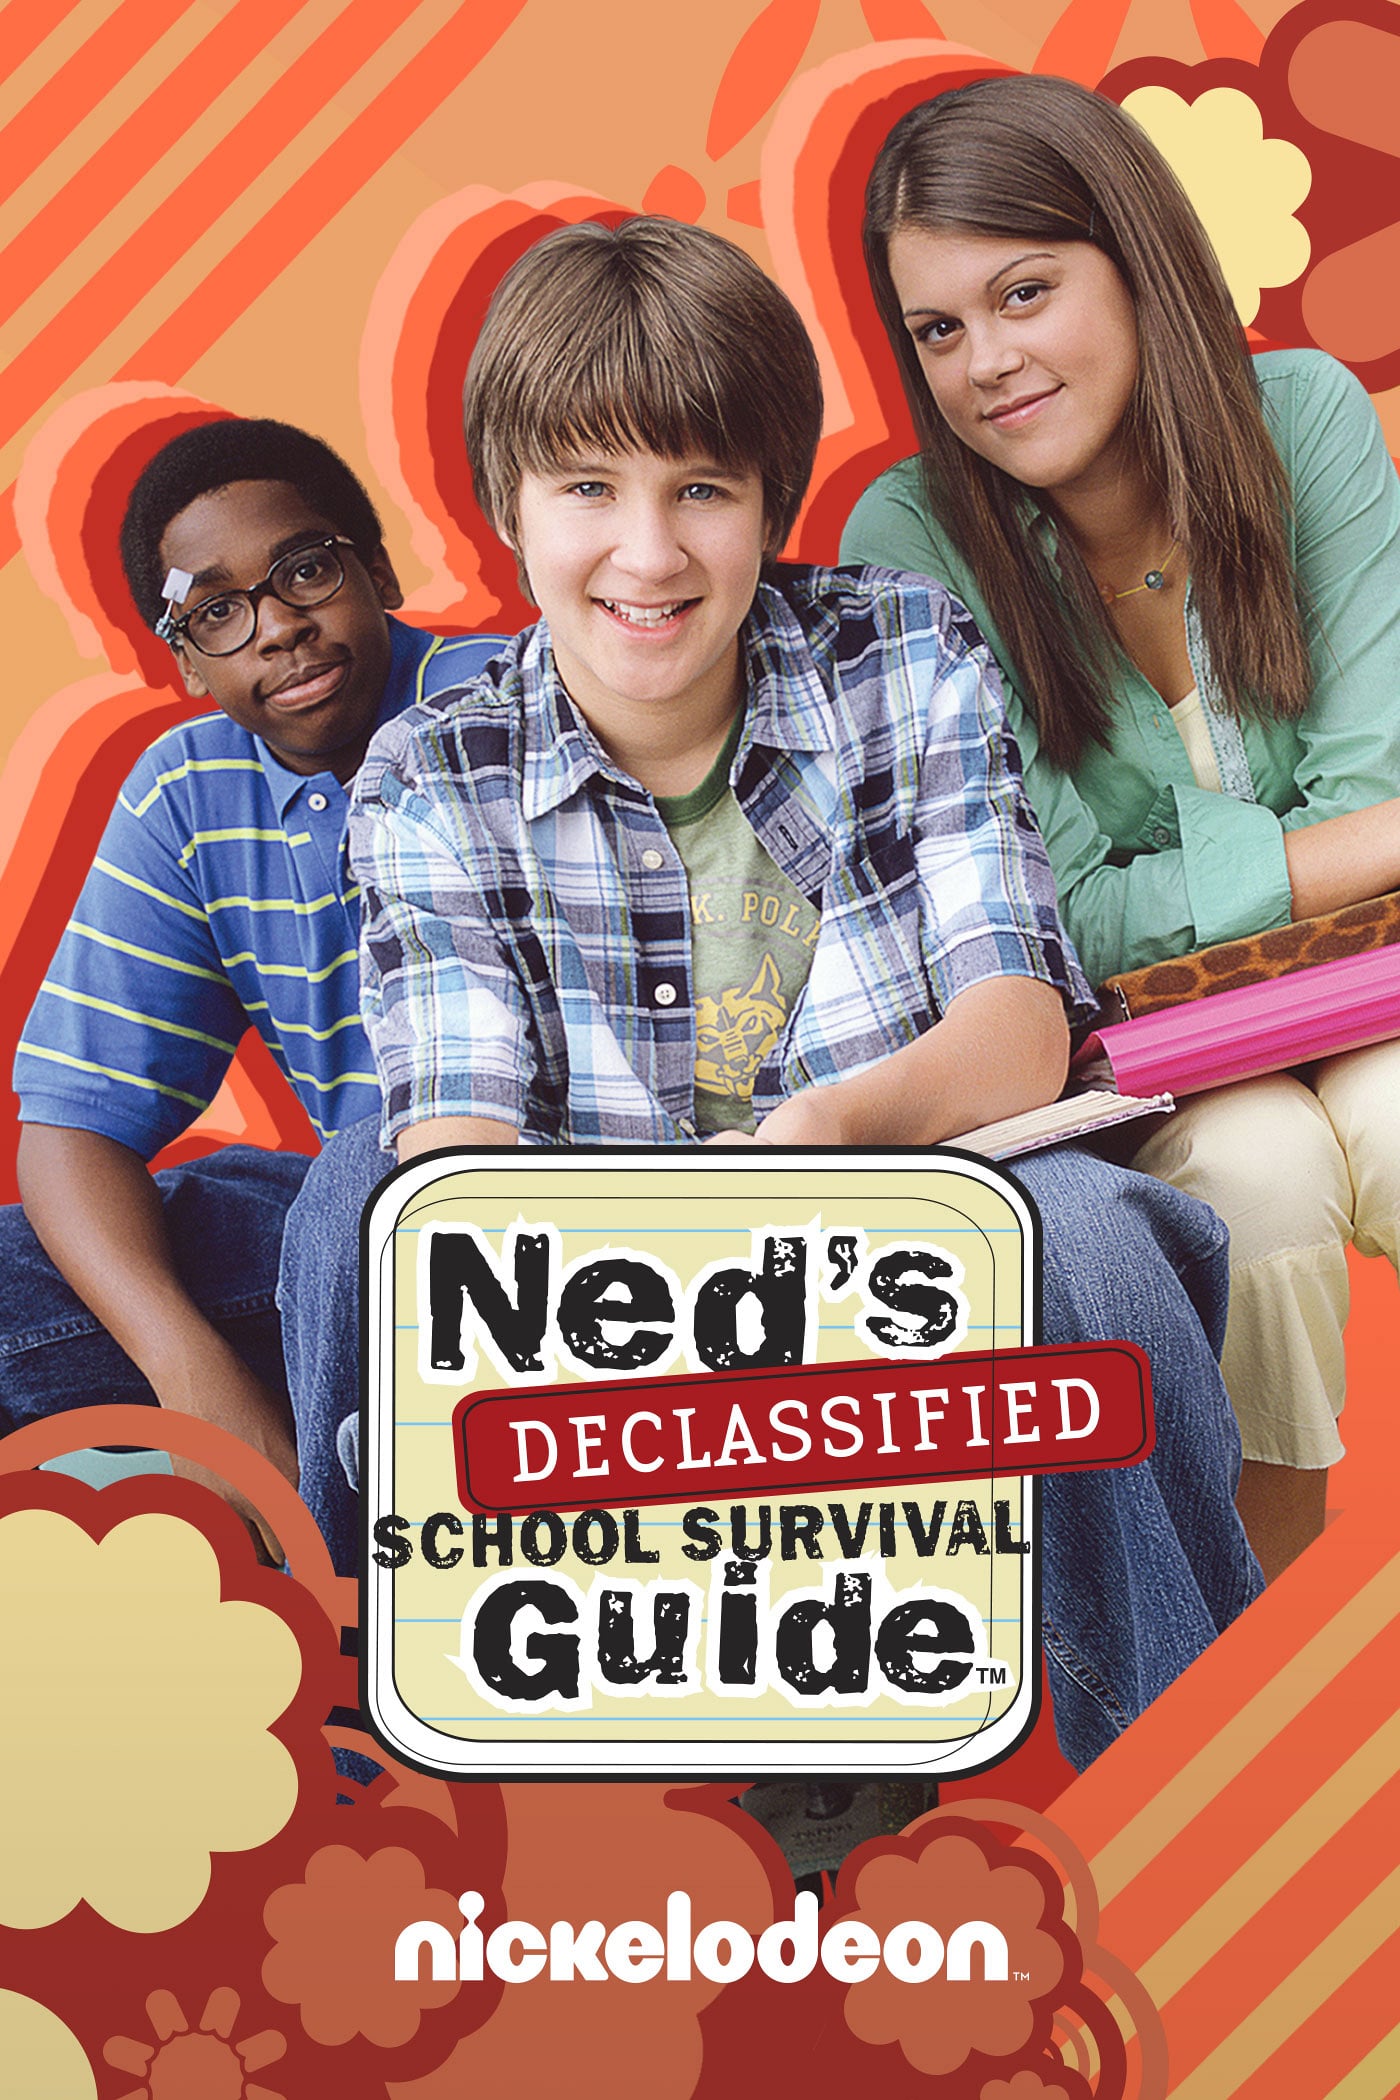 Ned S Declassified School Survival Guide 2004 Plex Is Where To Watch Your Movies And Tv